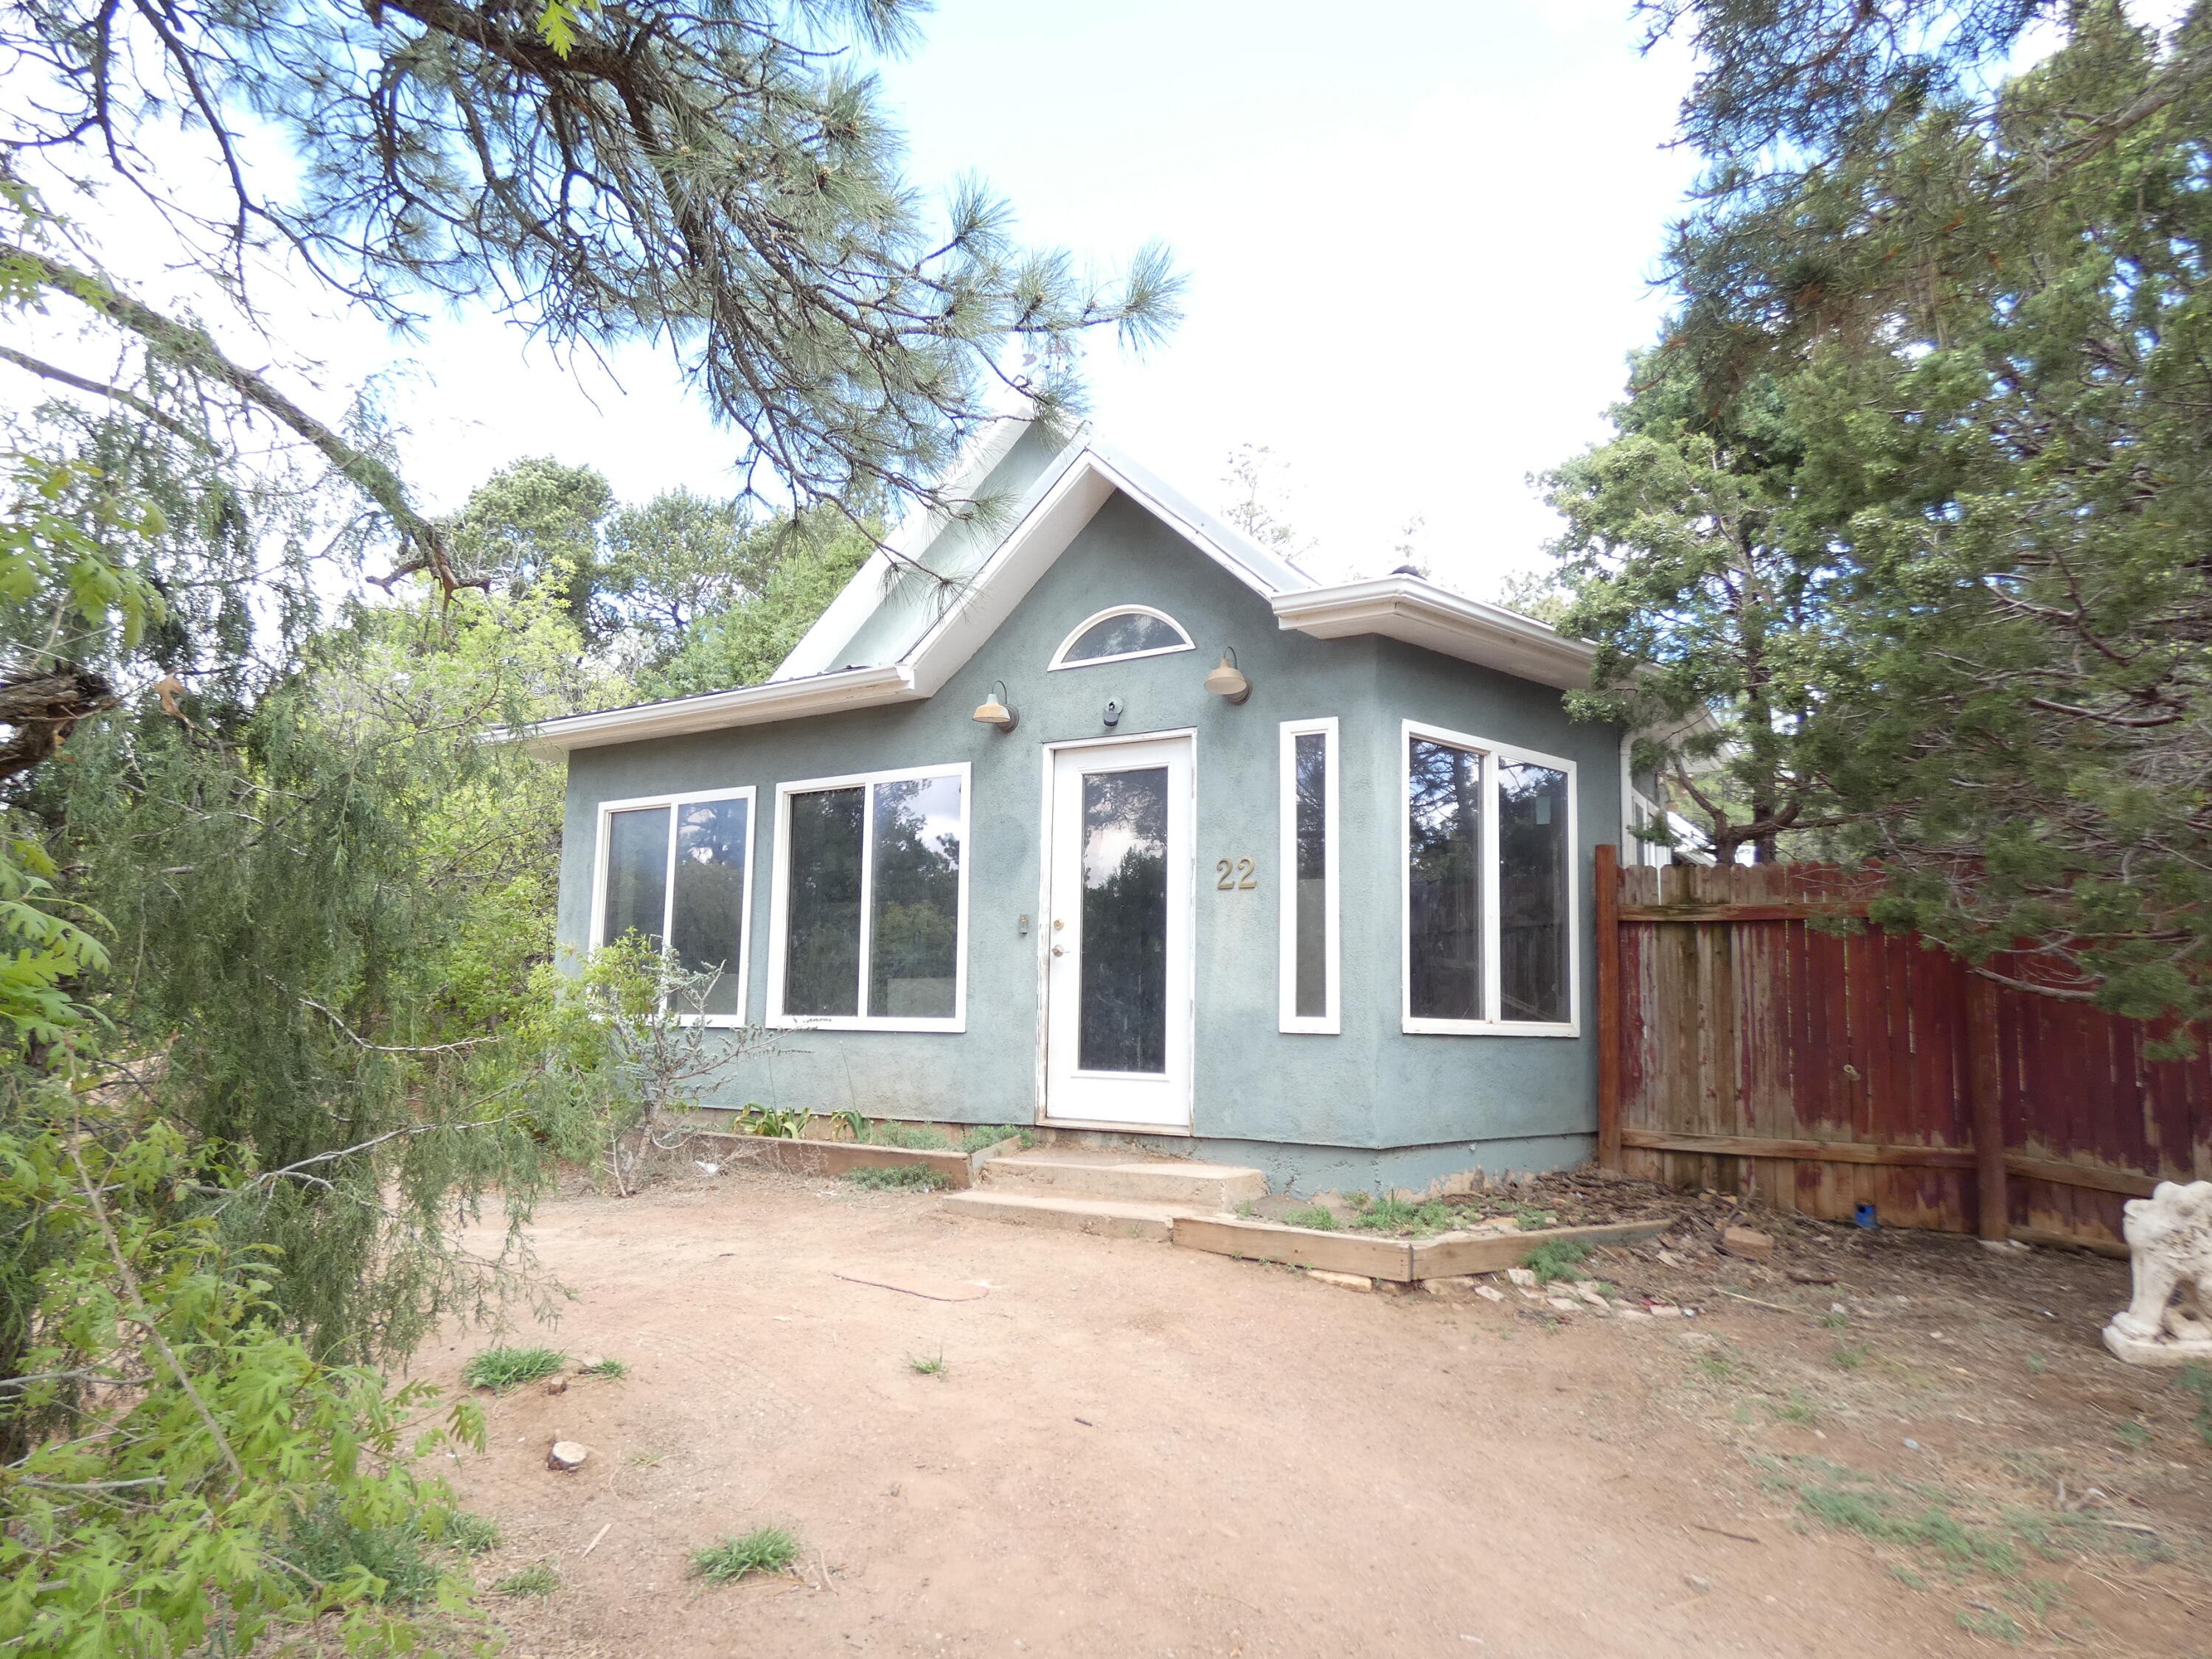 2-bedroom, 2-bathroom home on .6 acres. Unleash the Potential: This property offers an exceptional chance for those seeking a project. While it requires repairs, the opportunities are boundless.